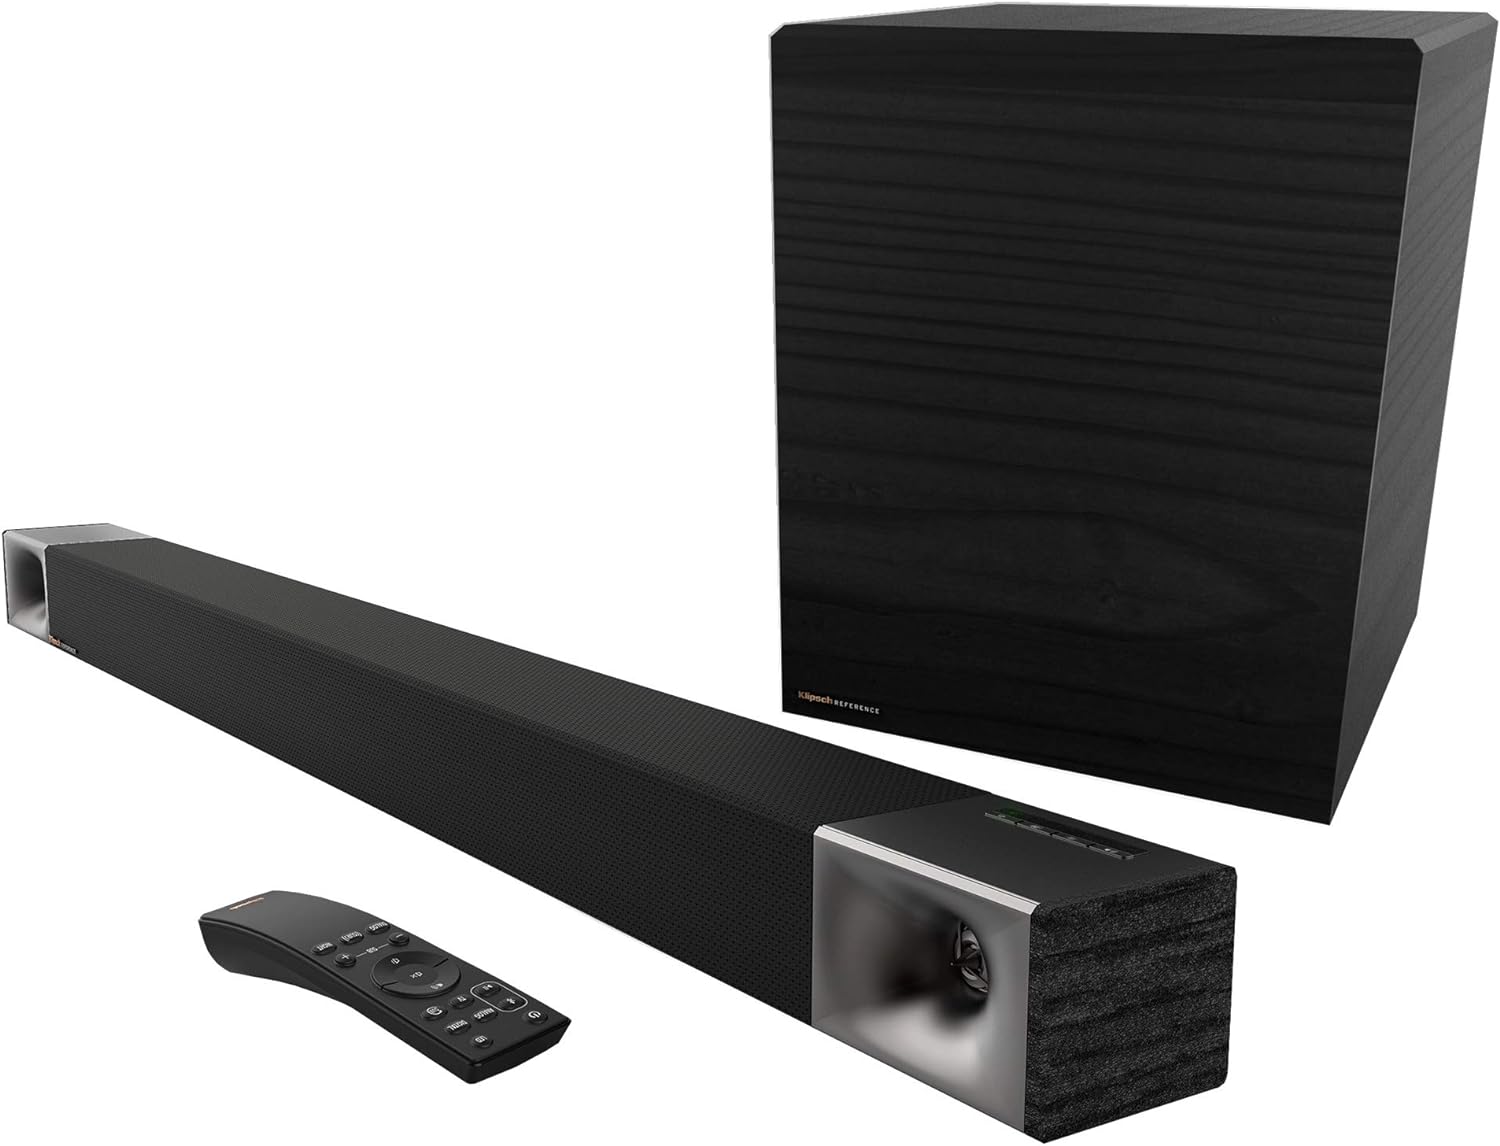 3.1 Home Theater System Review